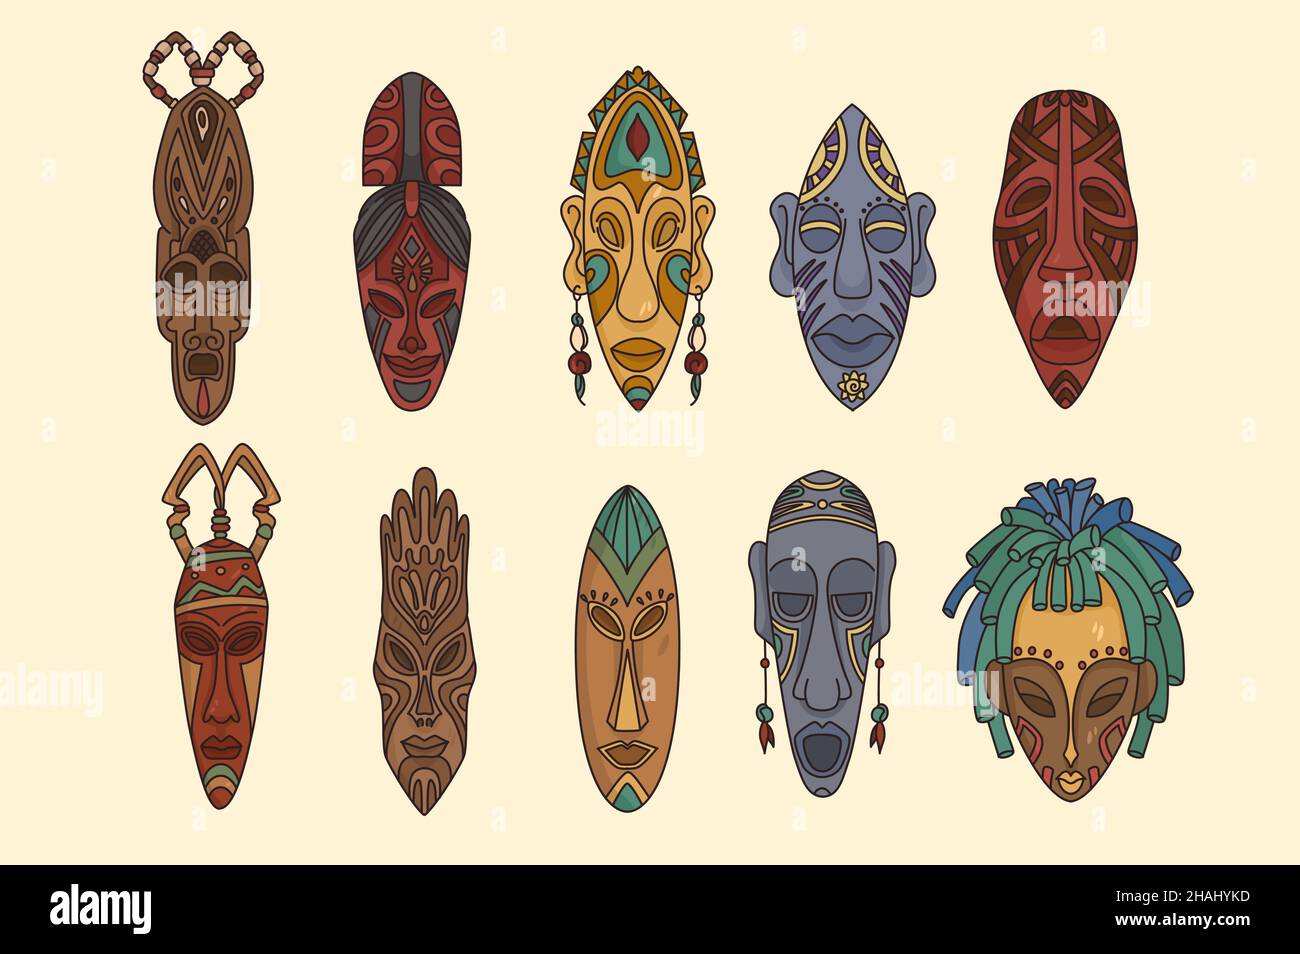 Set of tribal African masks on white background. Collection of colorful ritual facemasks of indigenous people or tribes. Aborigine Africa culture, diversity. Vector illustration, cartoon character.  Stock Vector